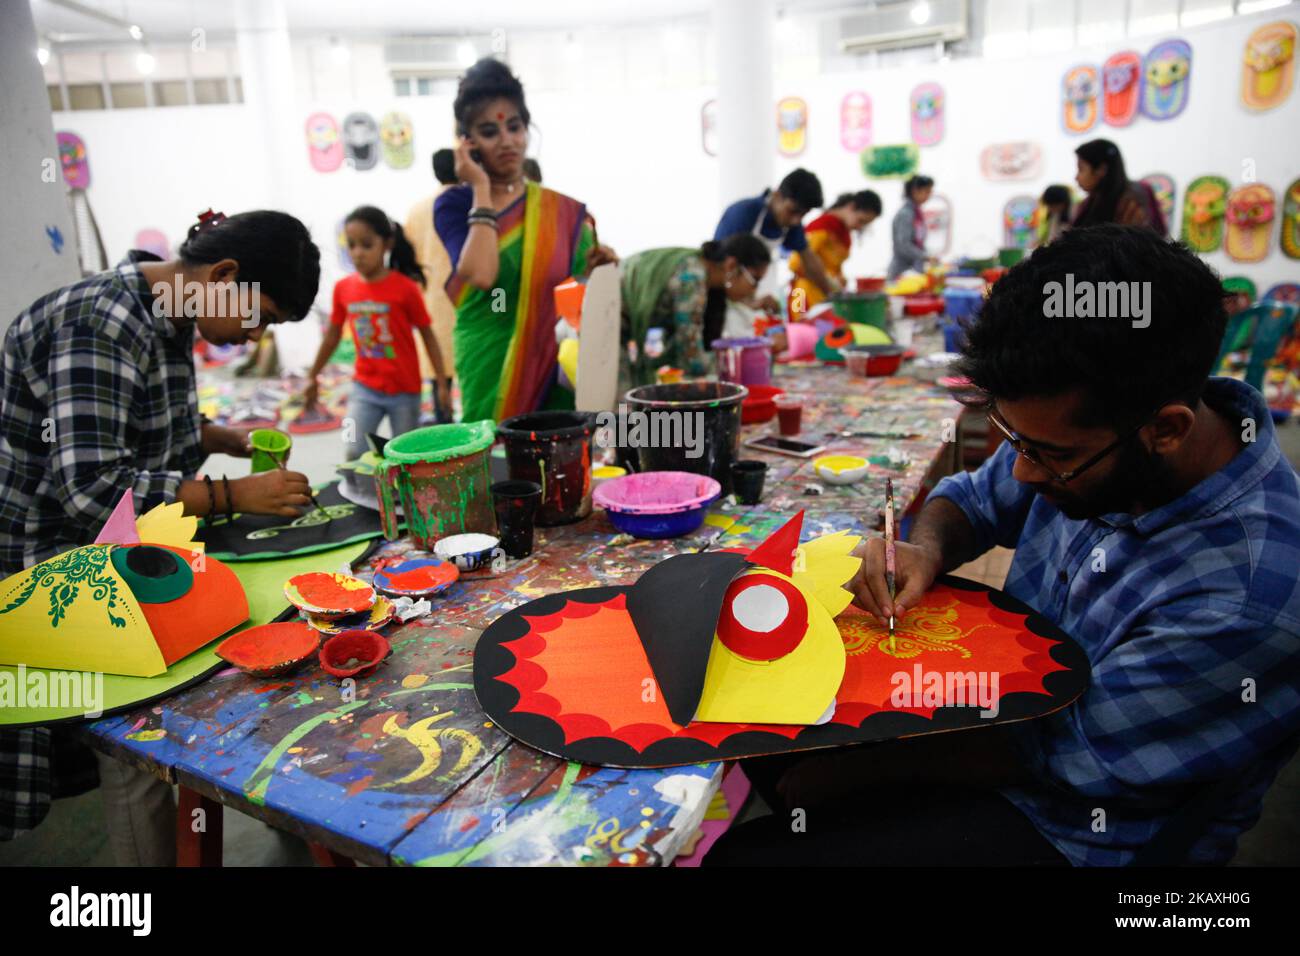 Students of Fine arts of Dhaka University painting masks for colorful preparation to celebrate upcoming Bengali New Year 1425 in Dhaka, Bangladesh 12 April 2018. The day will be celebrated on 14 April while the UNESCO added the Mangal Shobhajatra festival on Pahela Baishakh among other new items to the safeguarding intangible cultural heritage list. (Photo by Mehedi Hasan/NurPhoto) Stock Photo